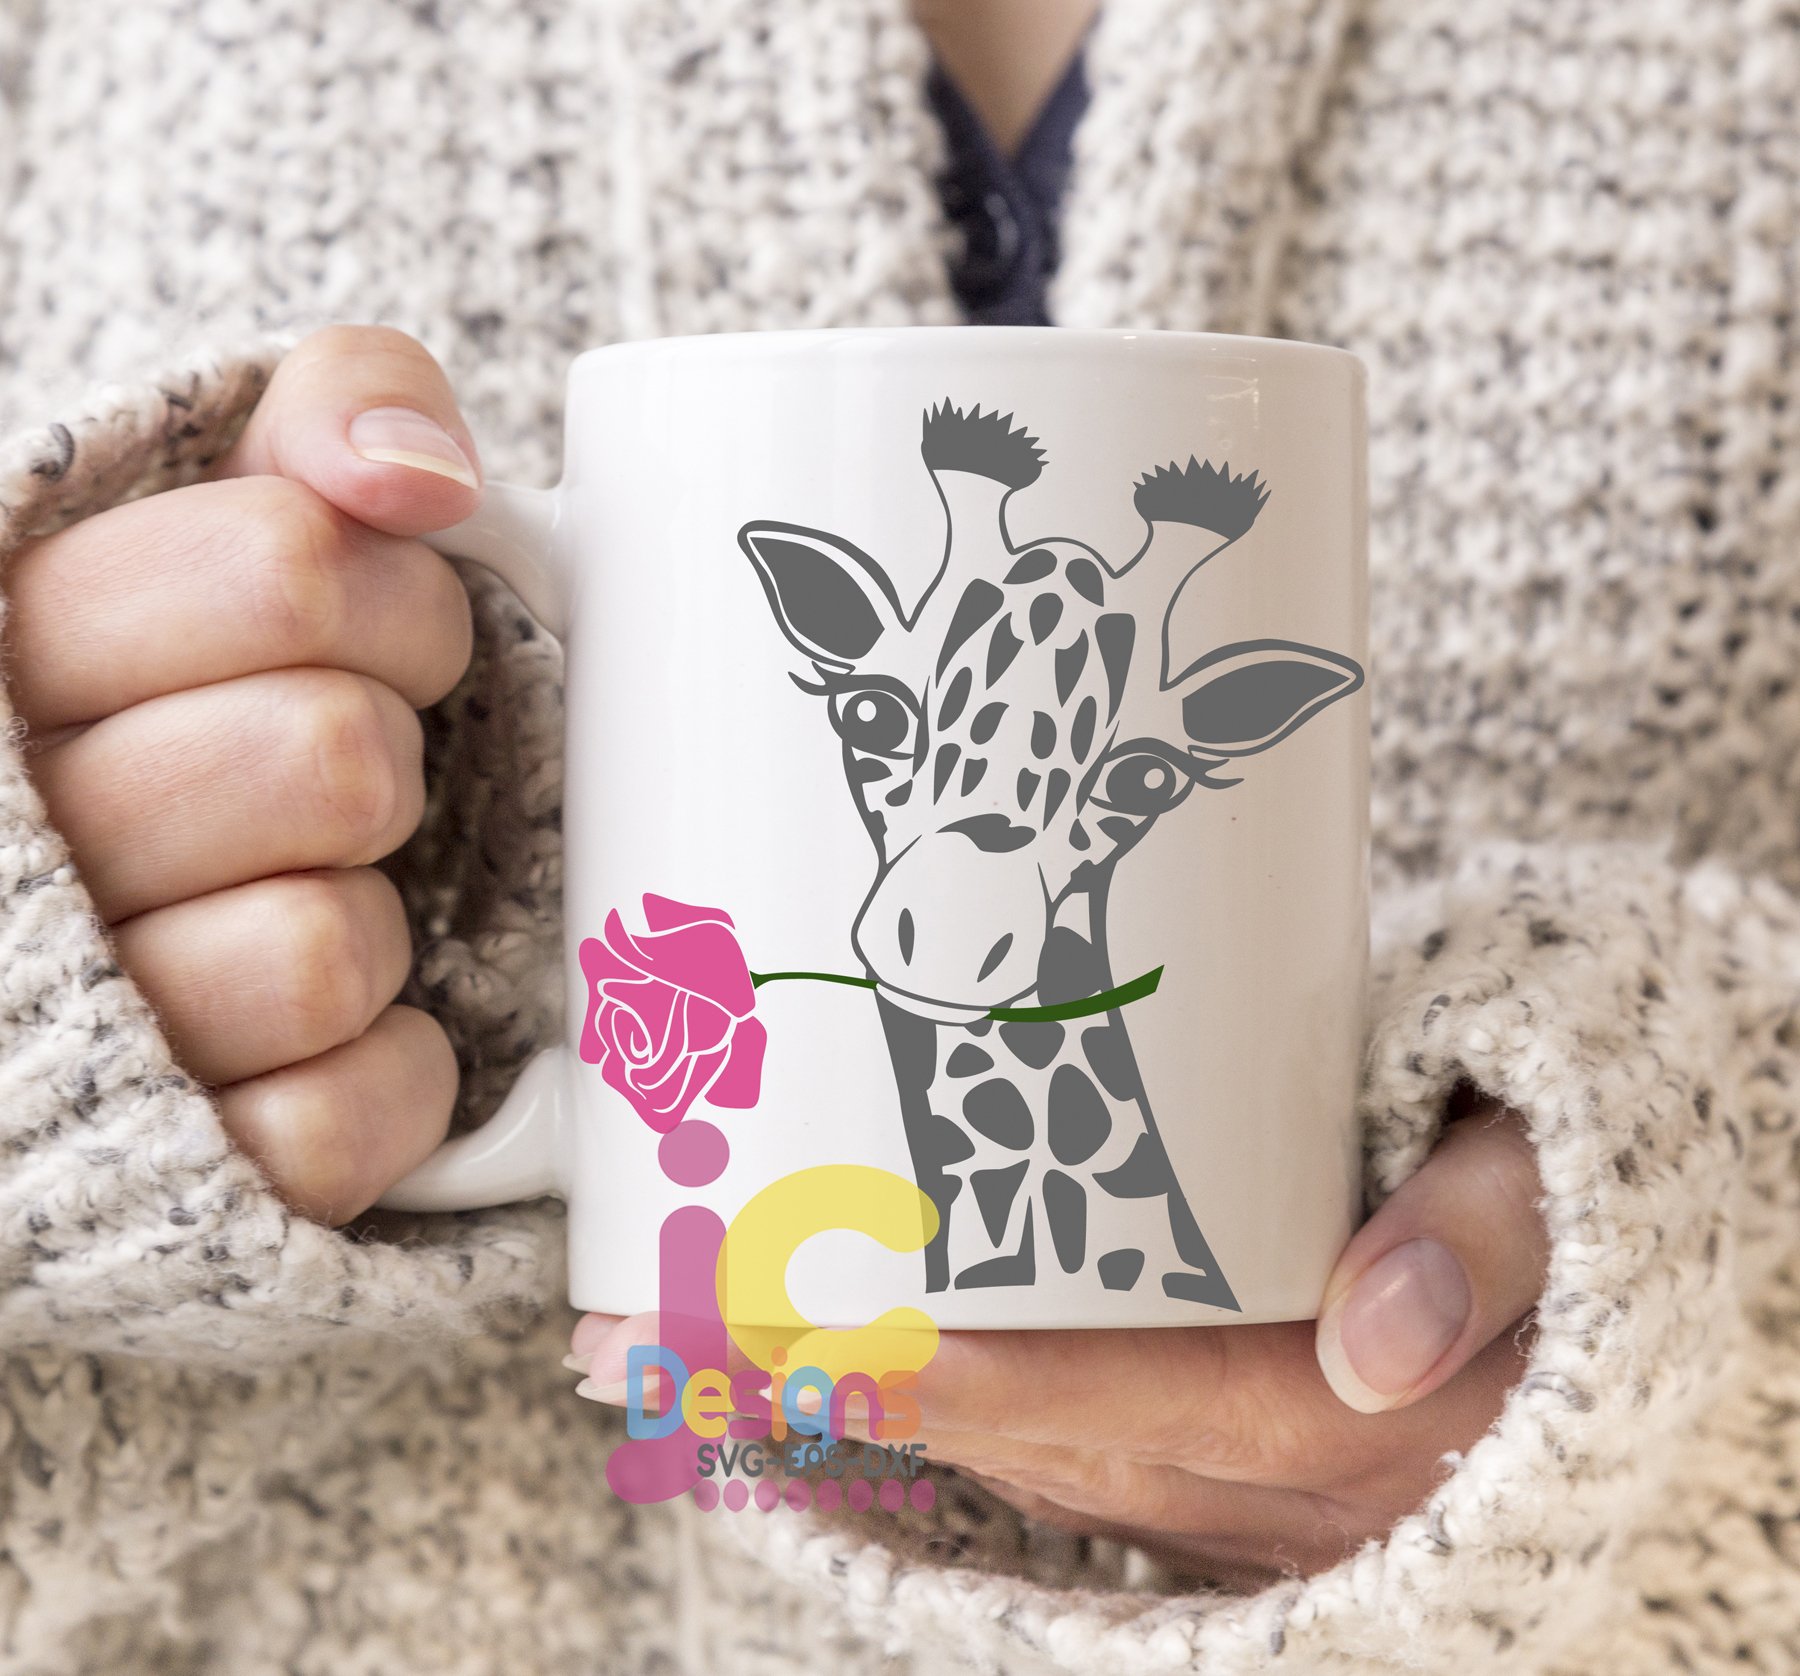 Person holding a coffee mug with a giraffe on it.